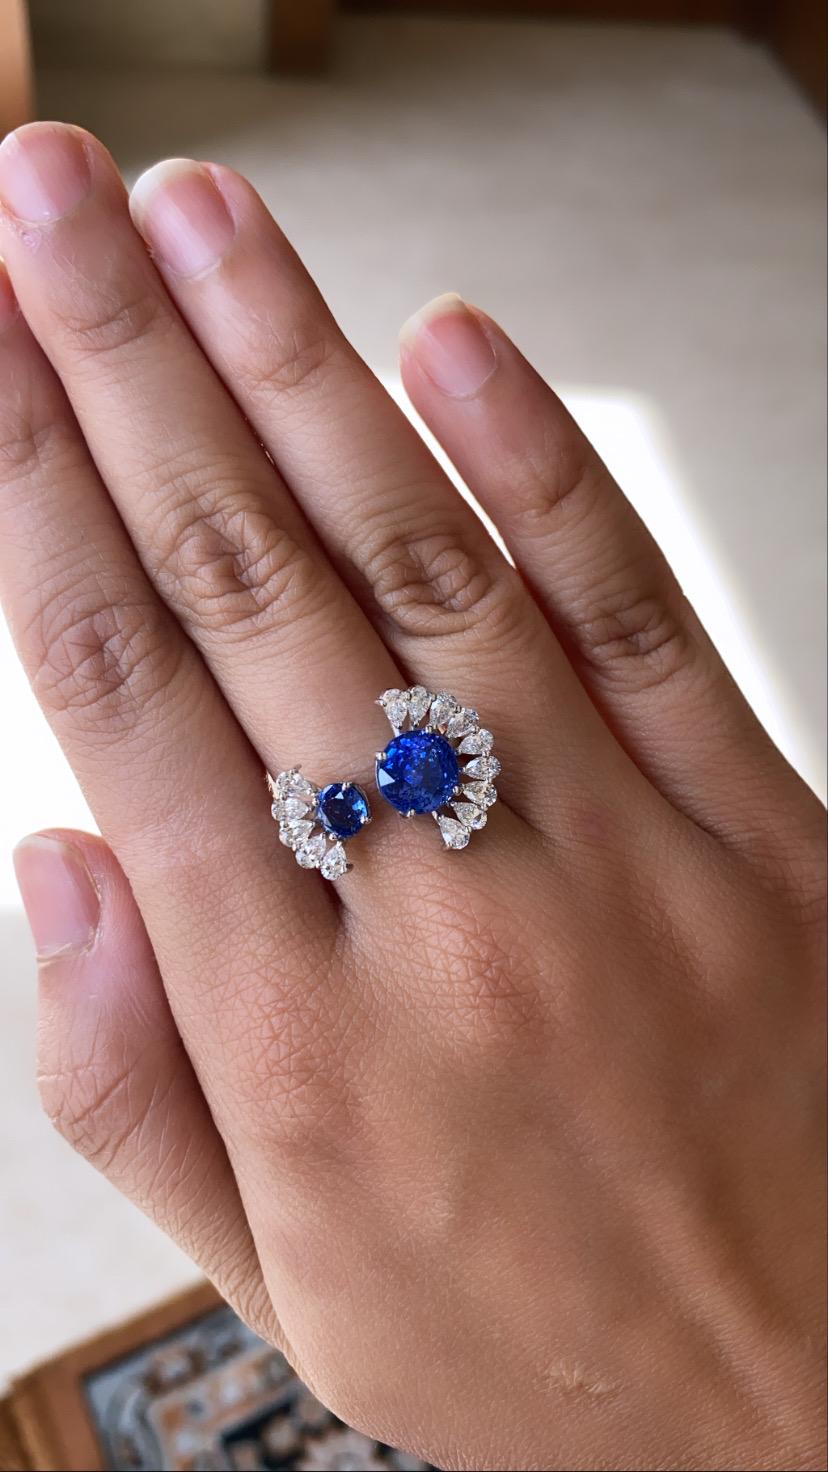 A very gorgeous and wearable Blue Sapphire & Diamonds Cocktail Ring set in 18K White Gold. The Blue Sapphire weighs 3.69 carats and is of Ceylon (Sri Lanka) origin. The Blue Sapphire is completely natural, without any treatment. The weight of the